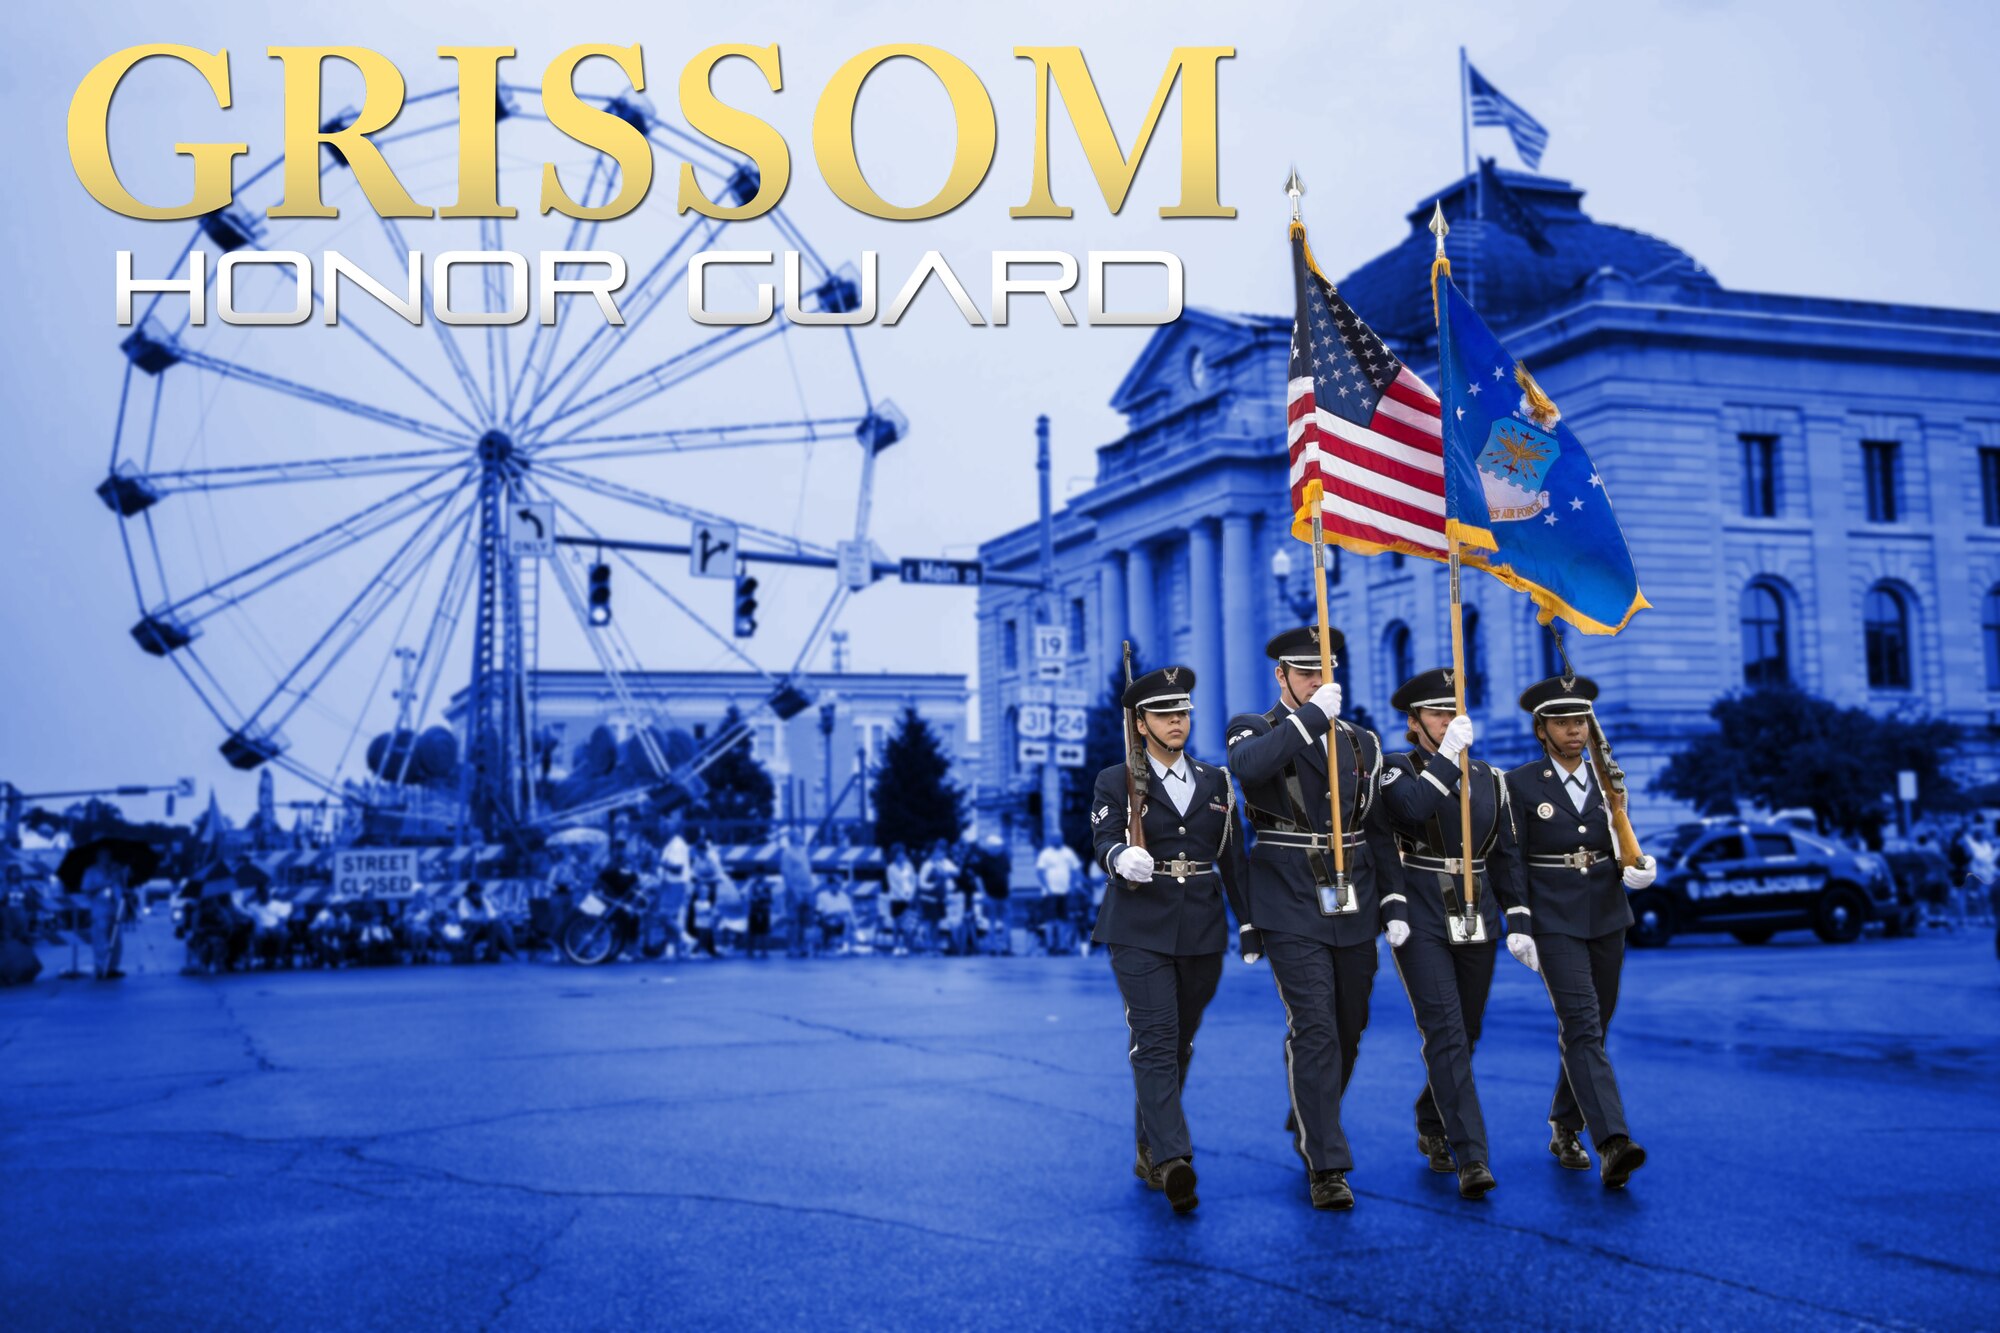 For over 70 years, the Air Force Honor Guard has served as a representation of all Air Force service members – both past and present – to the American public and world. Through the execution of historical Air Force ceremonies and coordinated movements rooted in a tradition of discipline and integrity, being a member of the U.S. Air Force Honor Guard requires exceeding the Air Force standards. (U.S. Air Force graphic / Senior Airman Harrison Withrow)